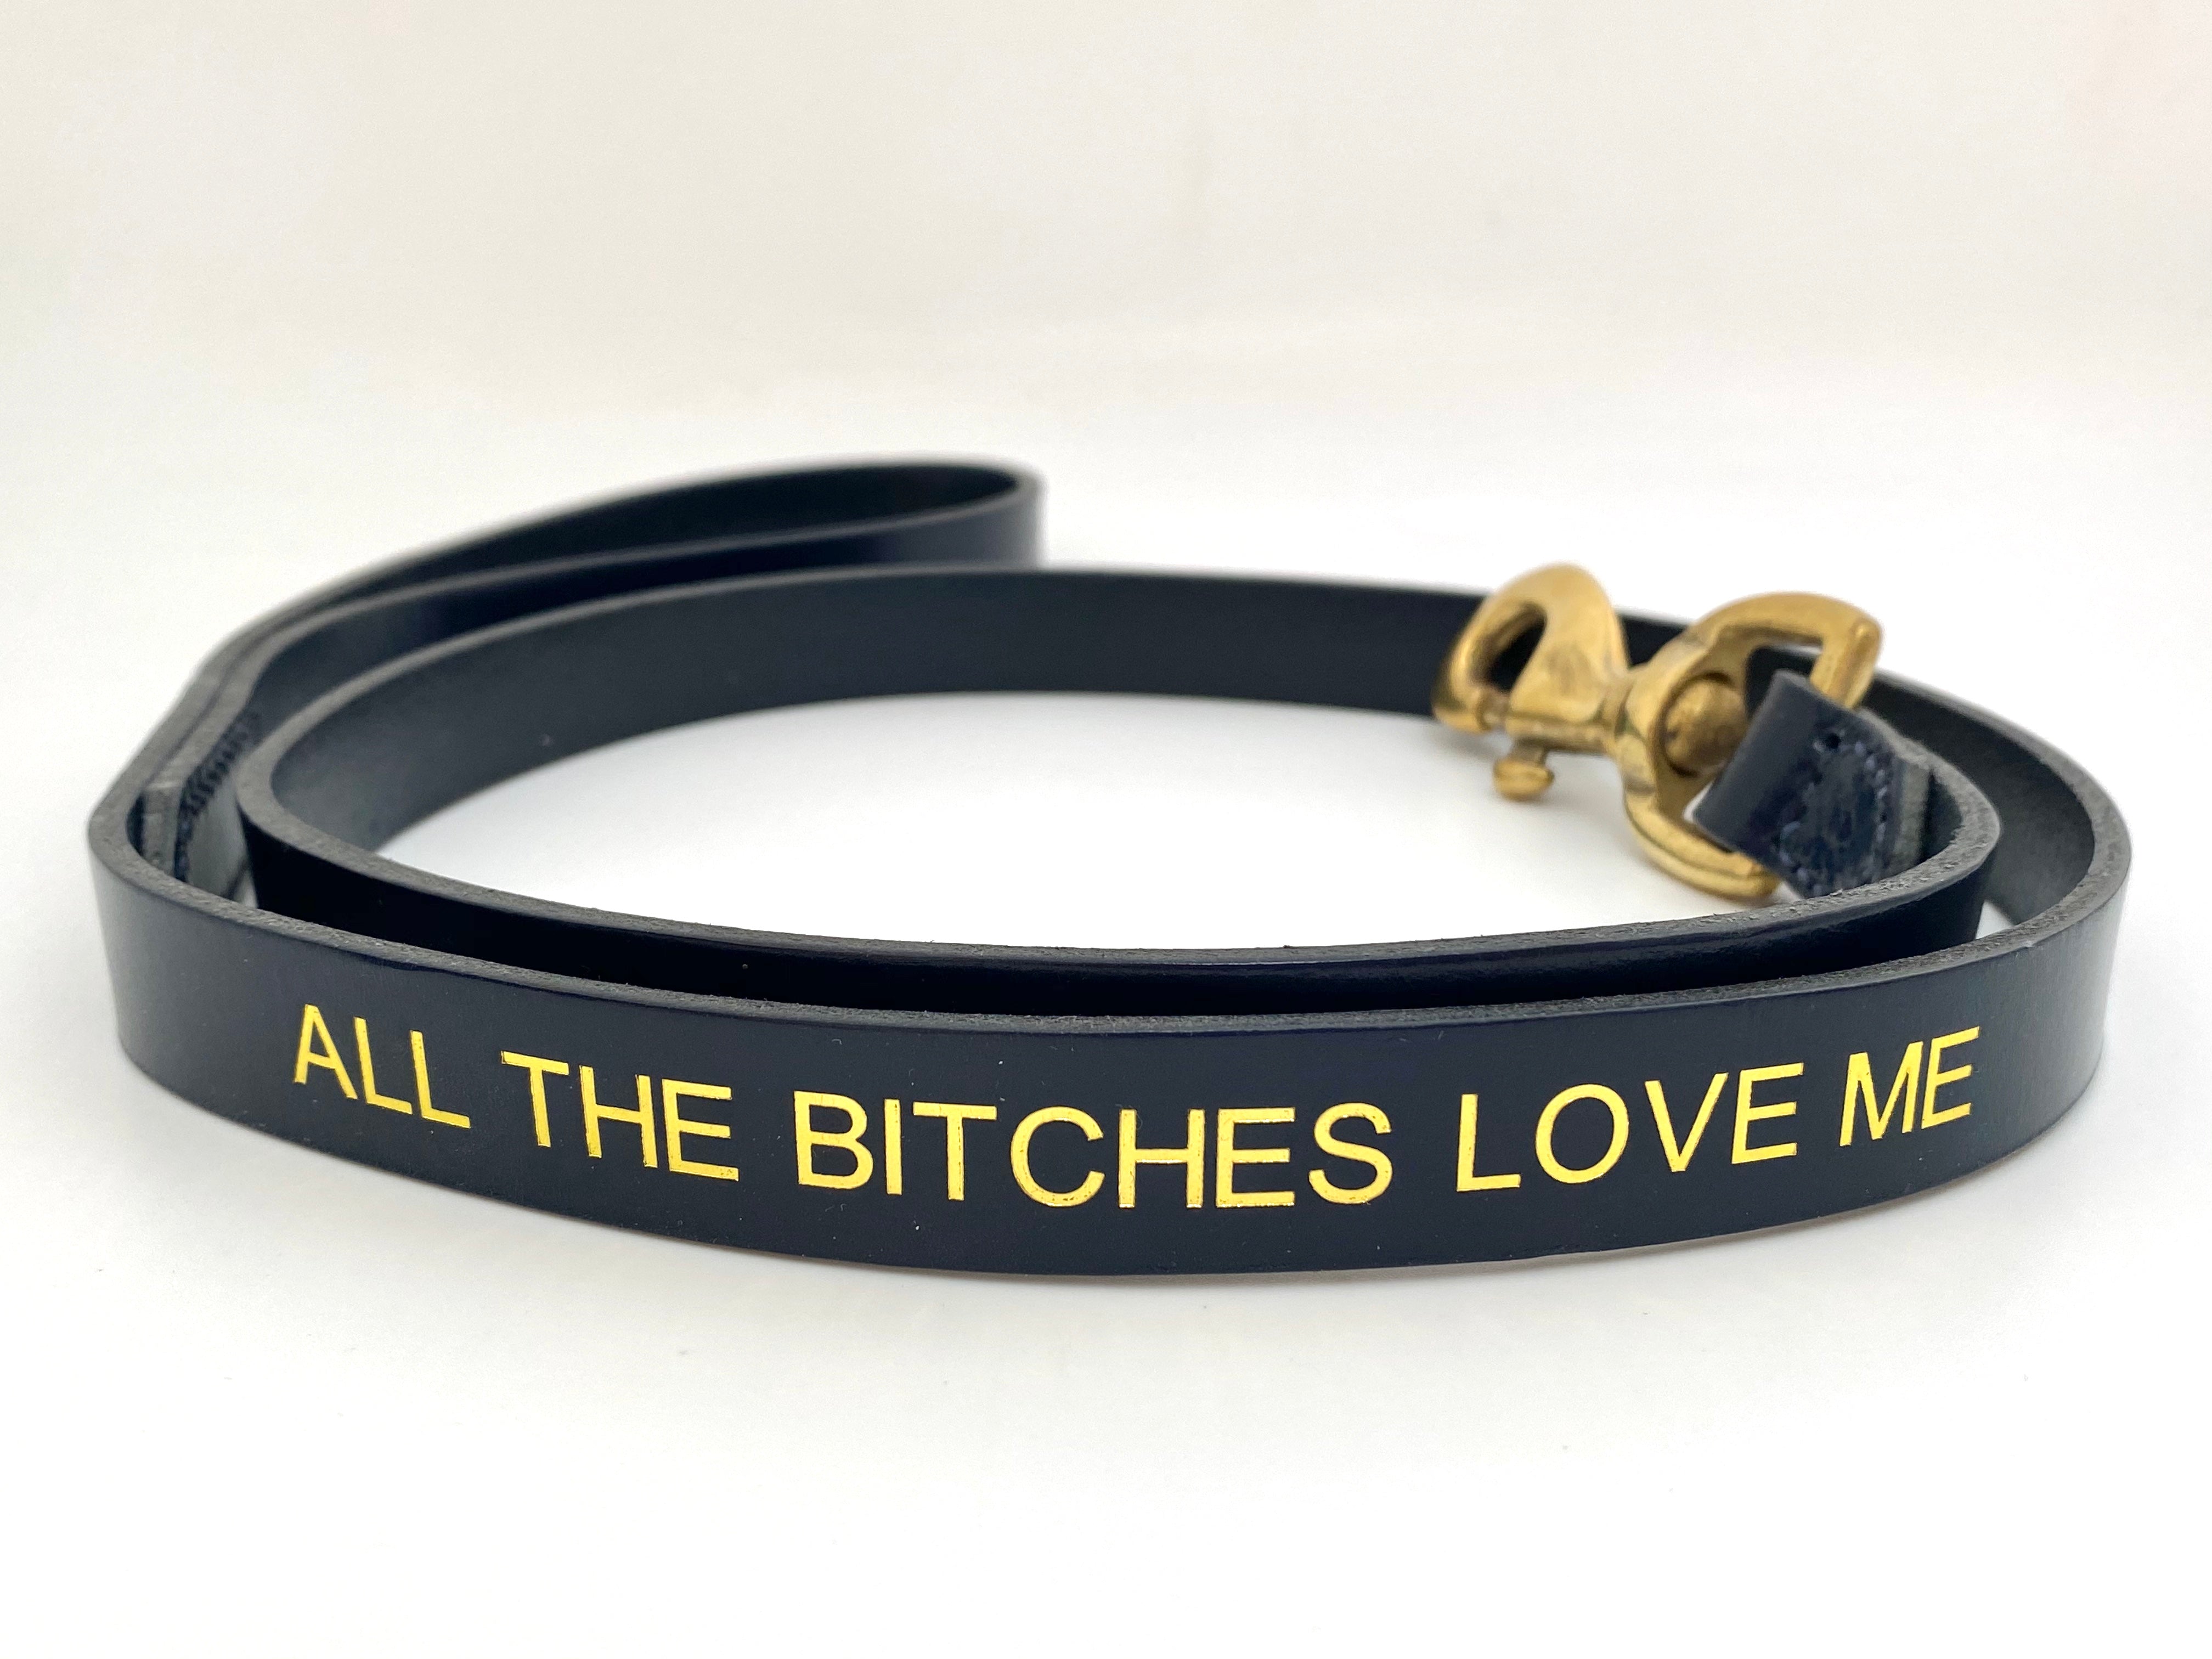 all the bitches love me dog leash